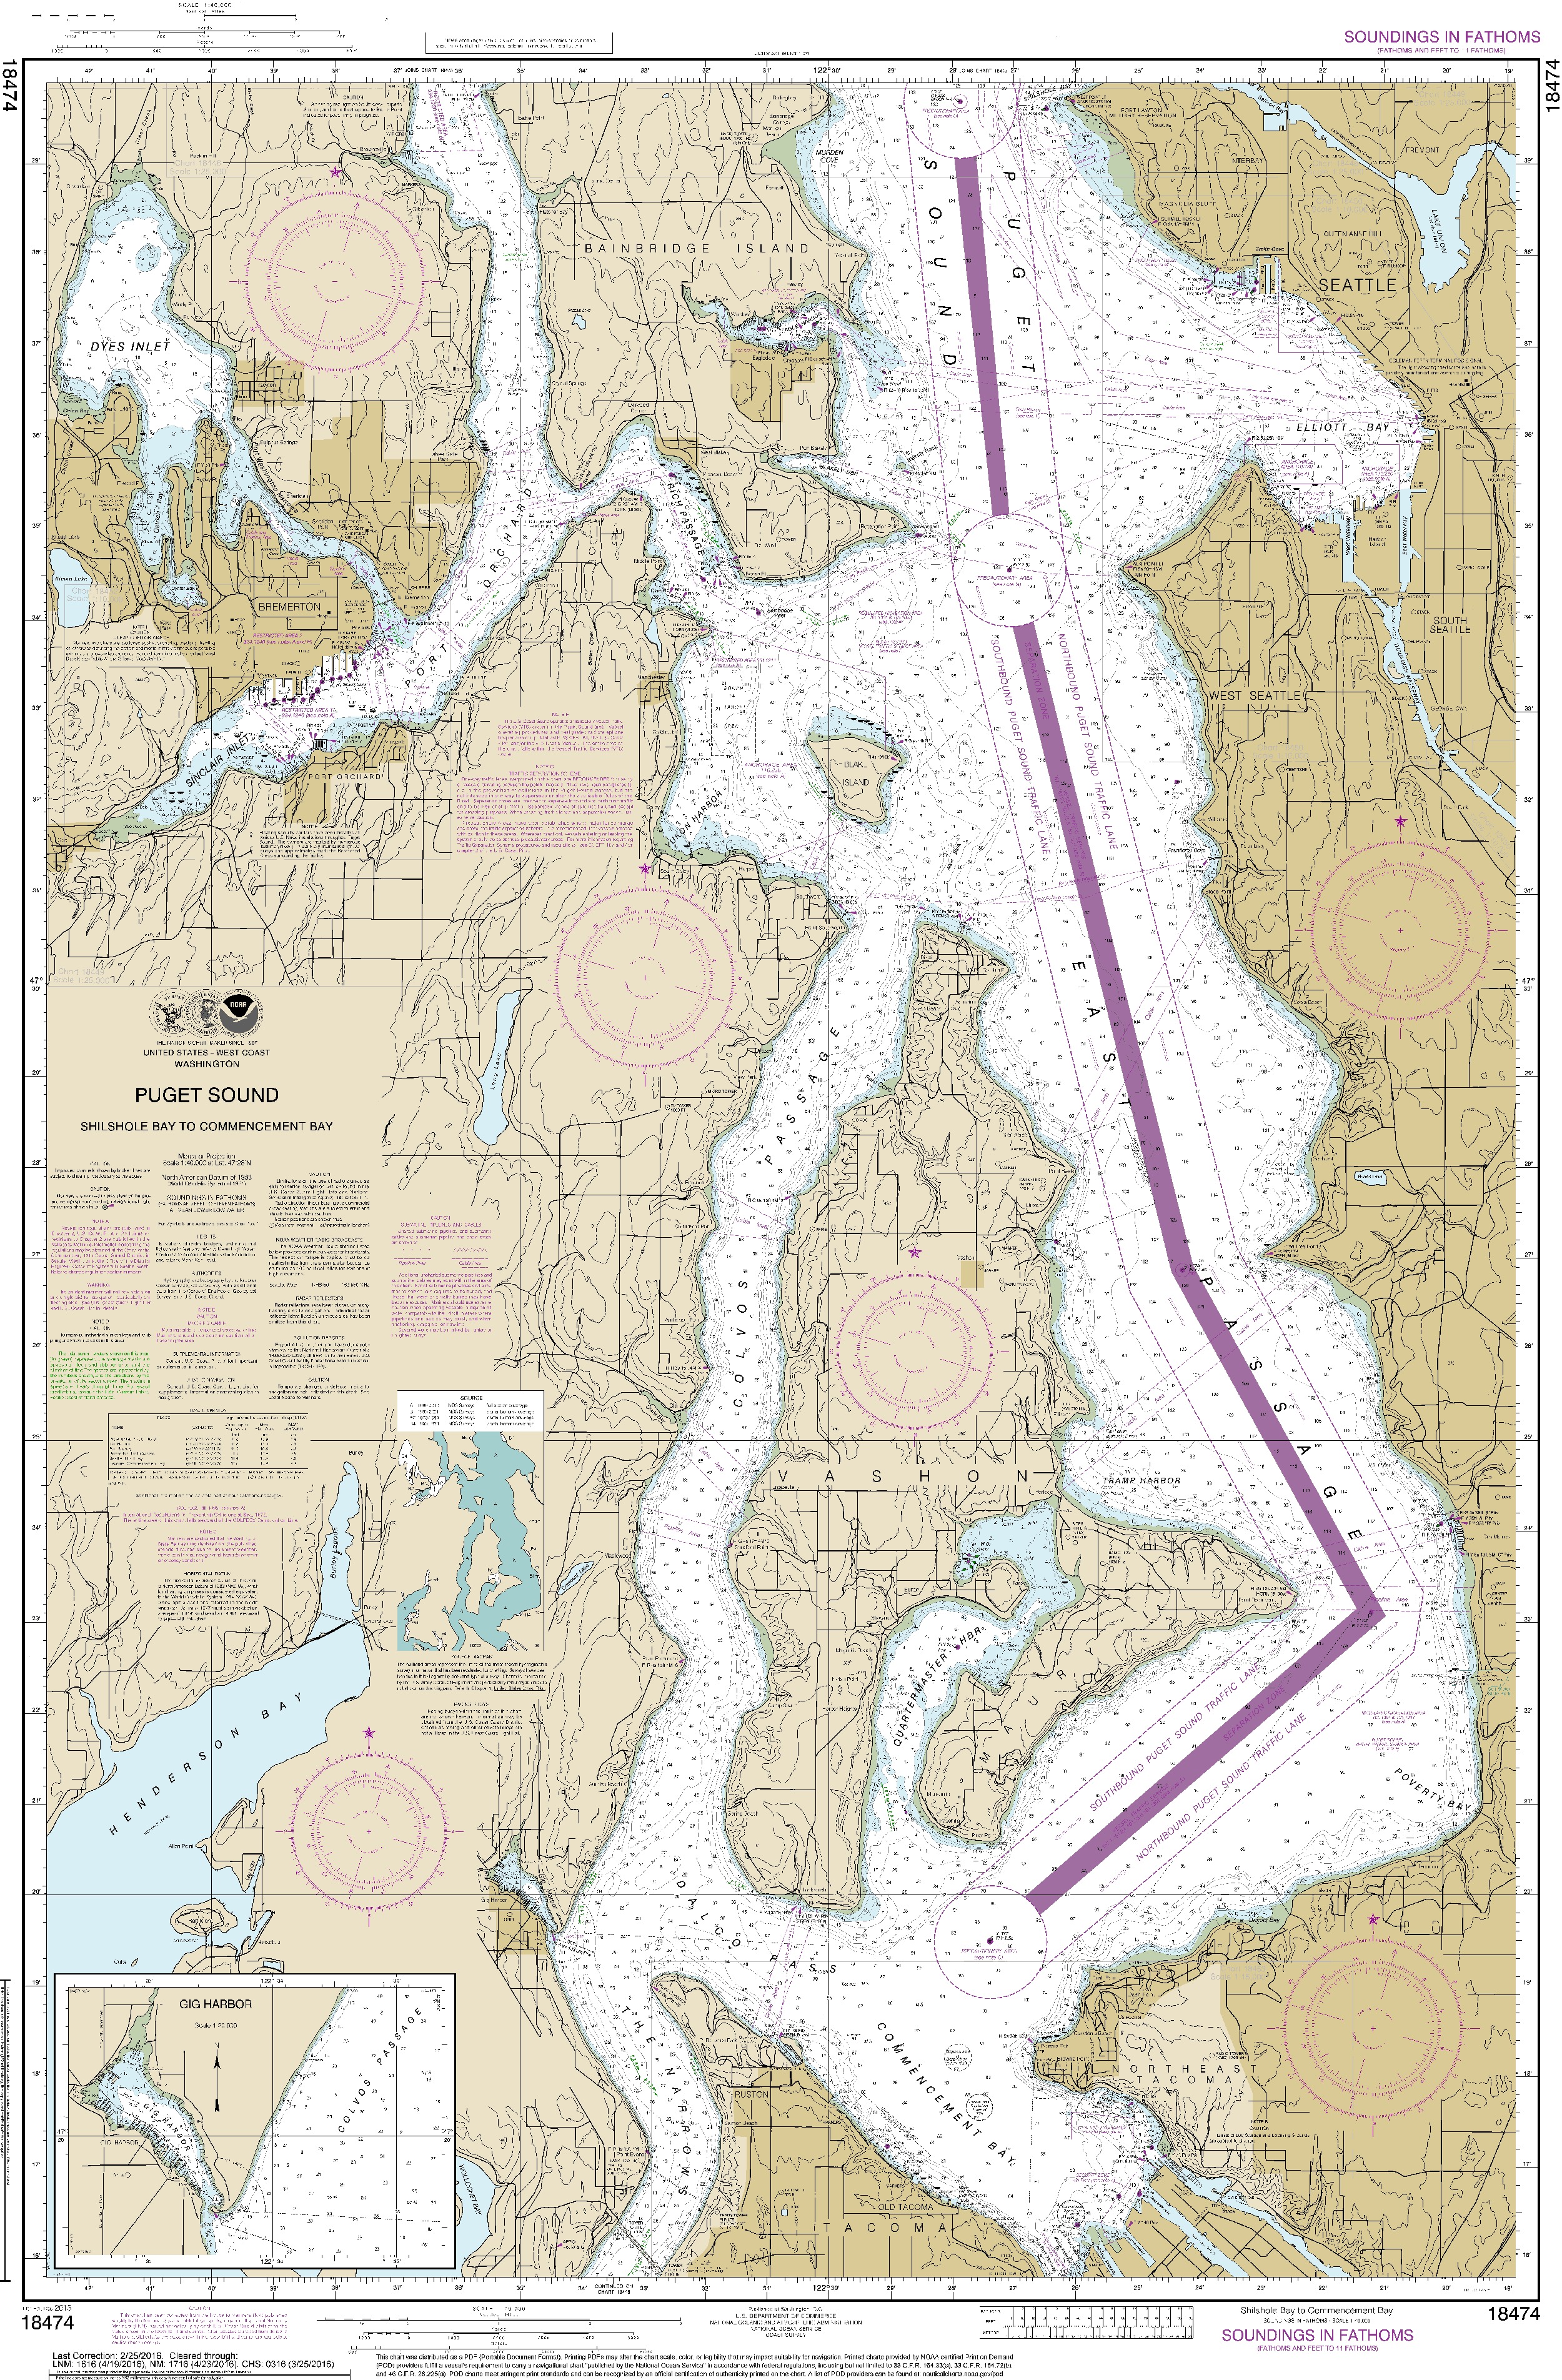 NOAA Nautical Chart 18474: Puget Sound-Shilshole Bay to Commencement Bay